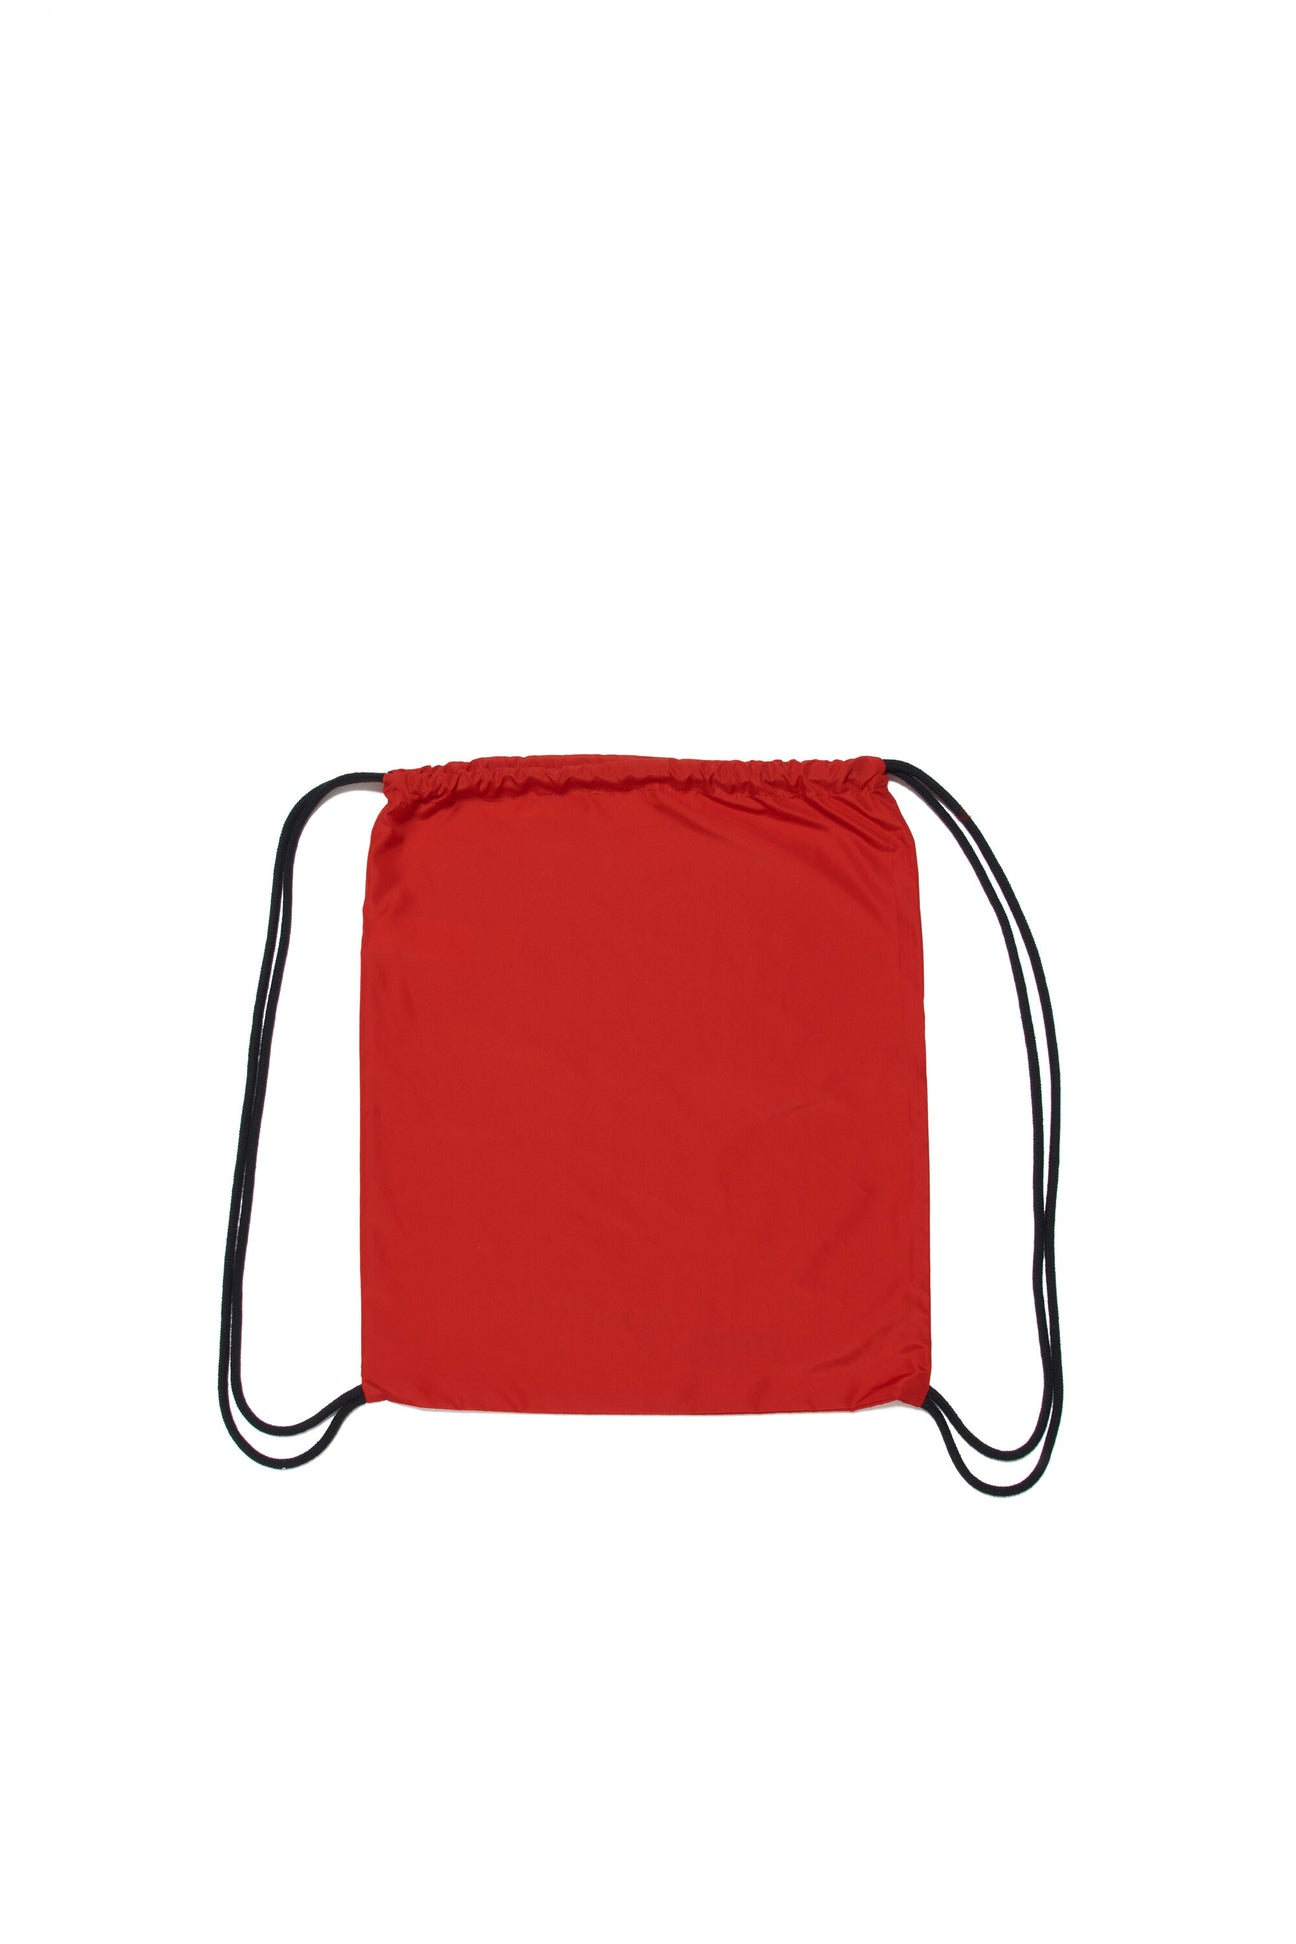 Red swimming bag backpack Red swimming bag backpack